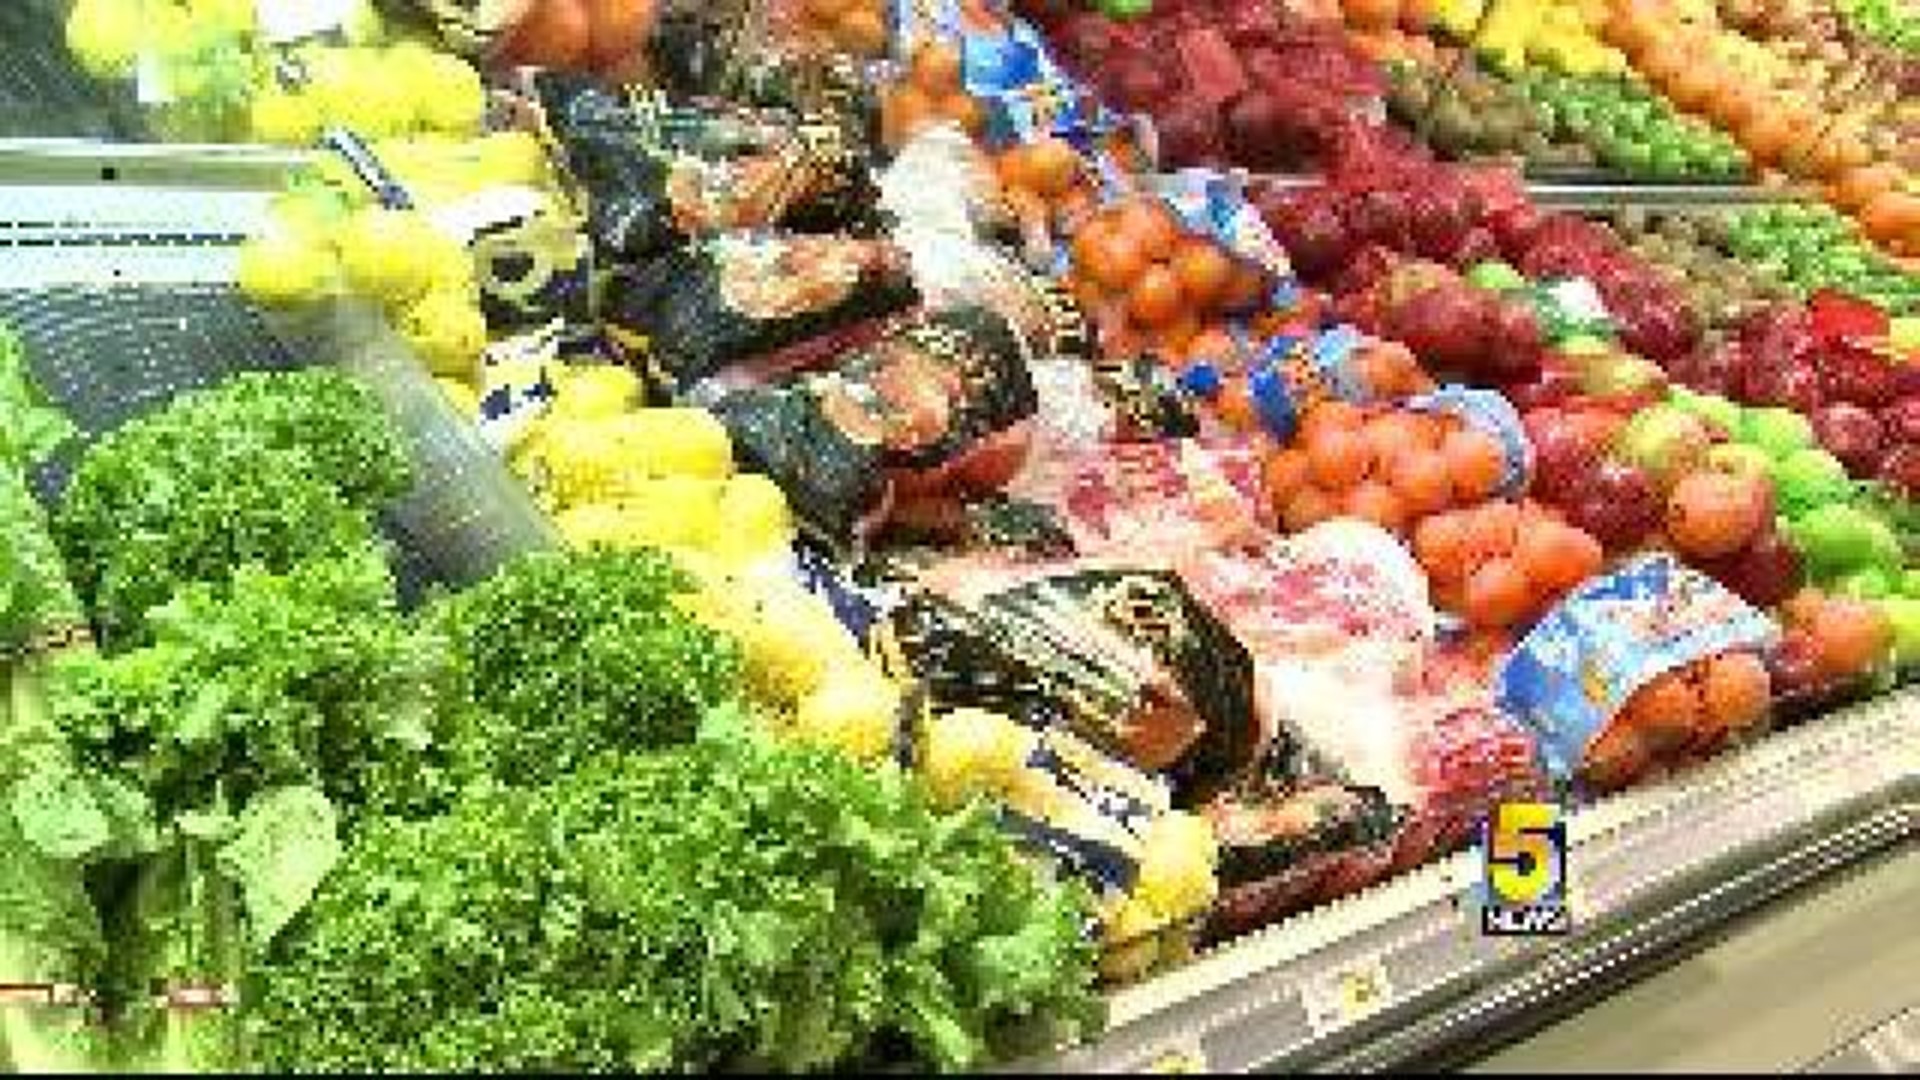 Shopping for Healthy Food on a Budget